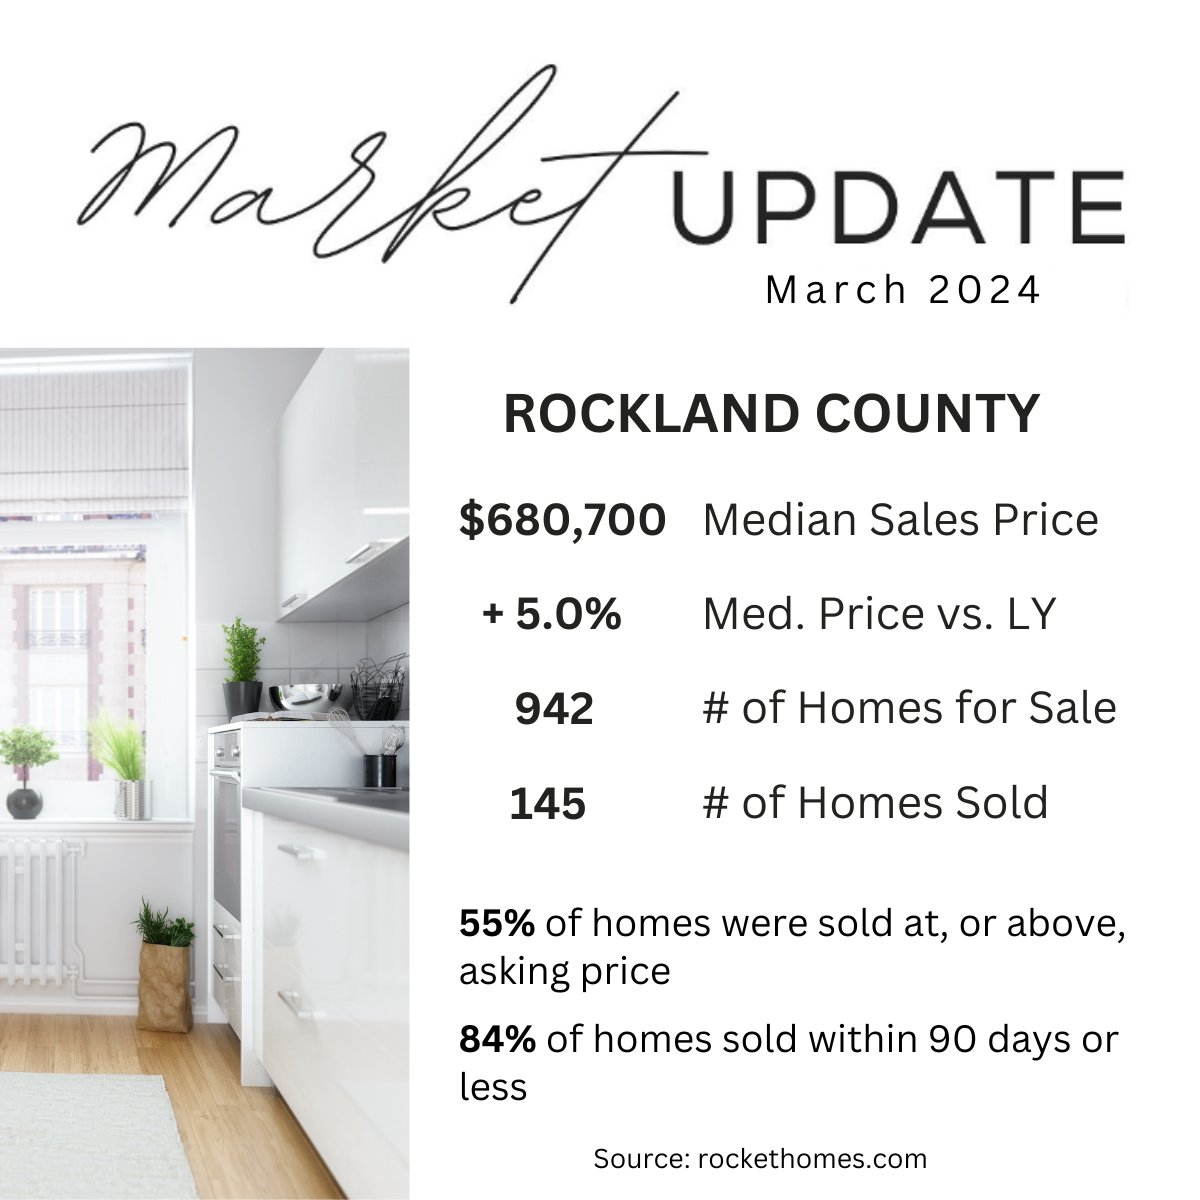 Rockland County Market Update: 
What You Need to Know!

Thinking about buying or selling a home in Rockland County?  Here's a quick snapshot of the current market to keep you informed:

#RocklandCountyRealEstate #MarketUpdate #BuyingaHome #SellingaHome